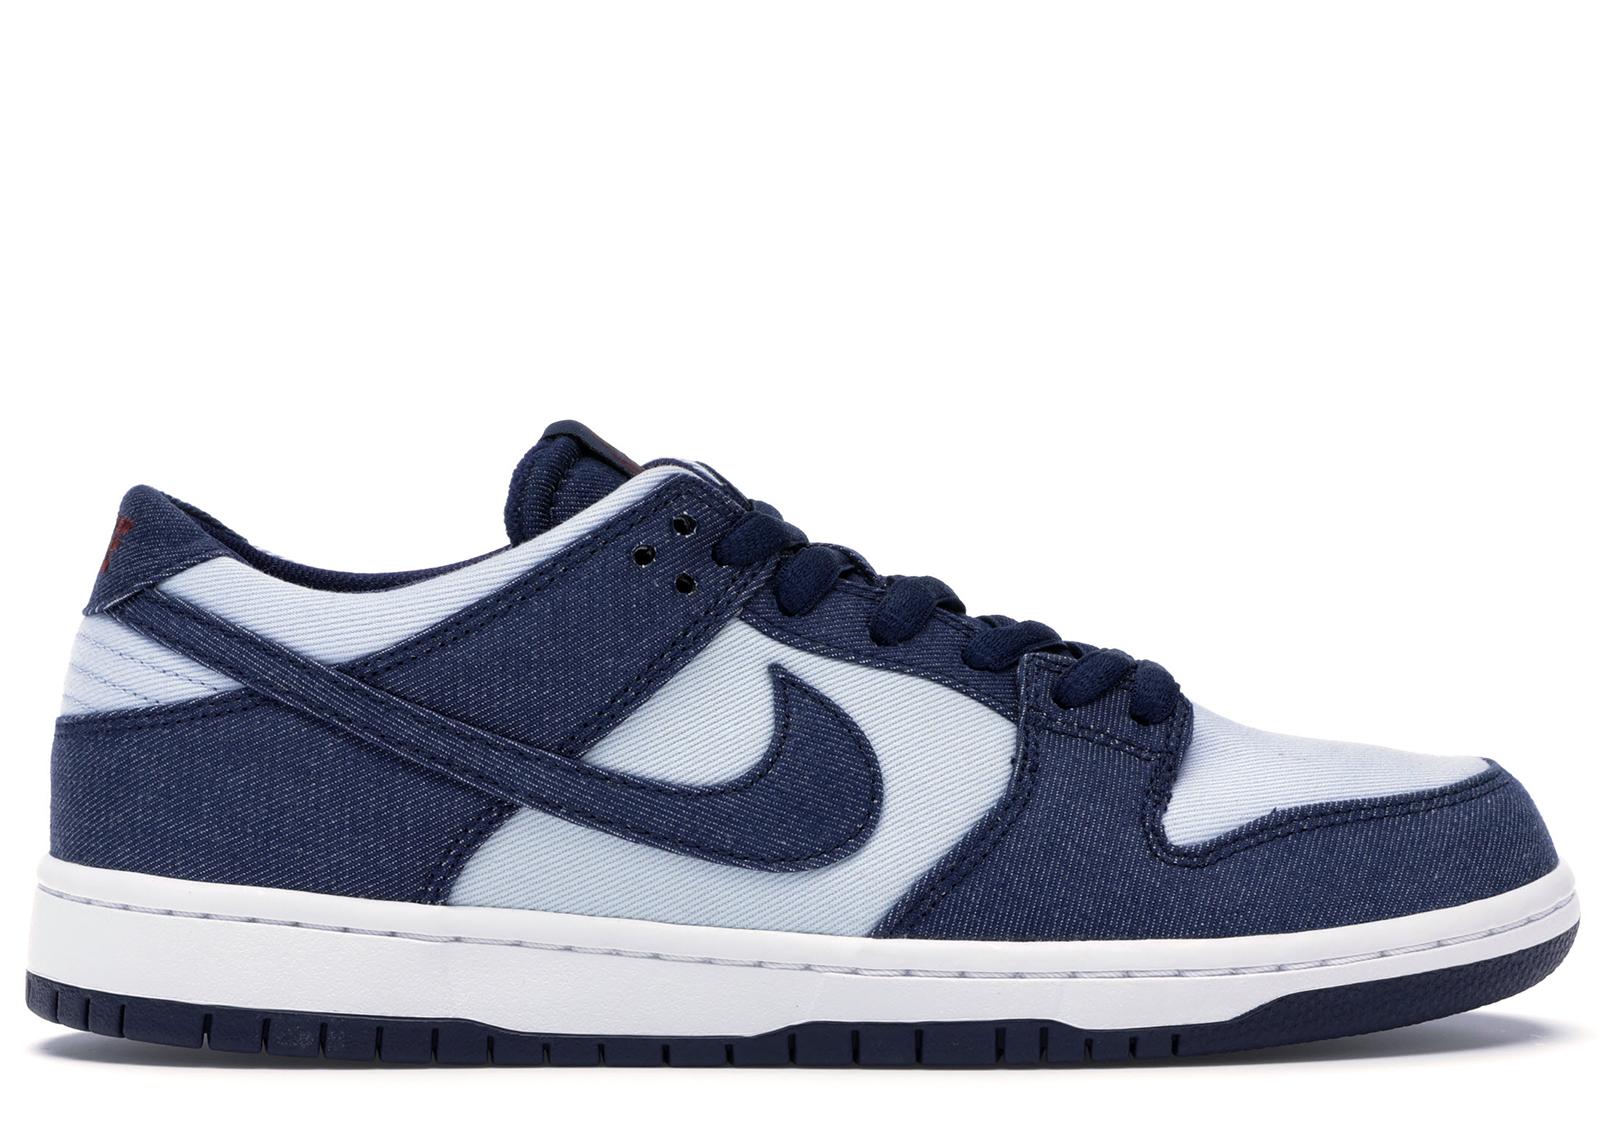 Nike Leather Sb Zoom Dunk Low Pro ' in 9.5 (Blue) for Men - Save 66% - Lyst